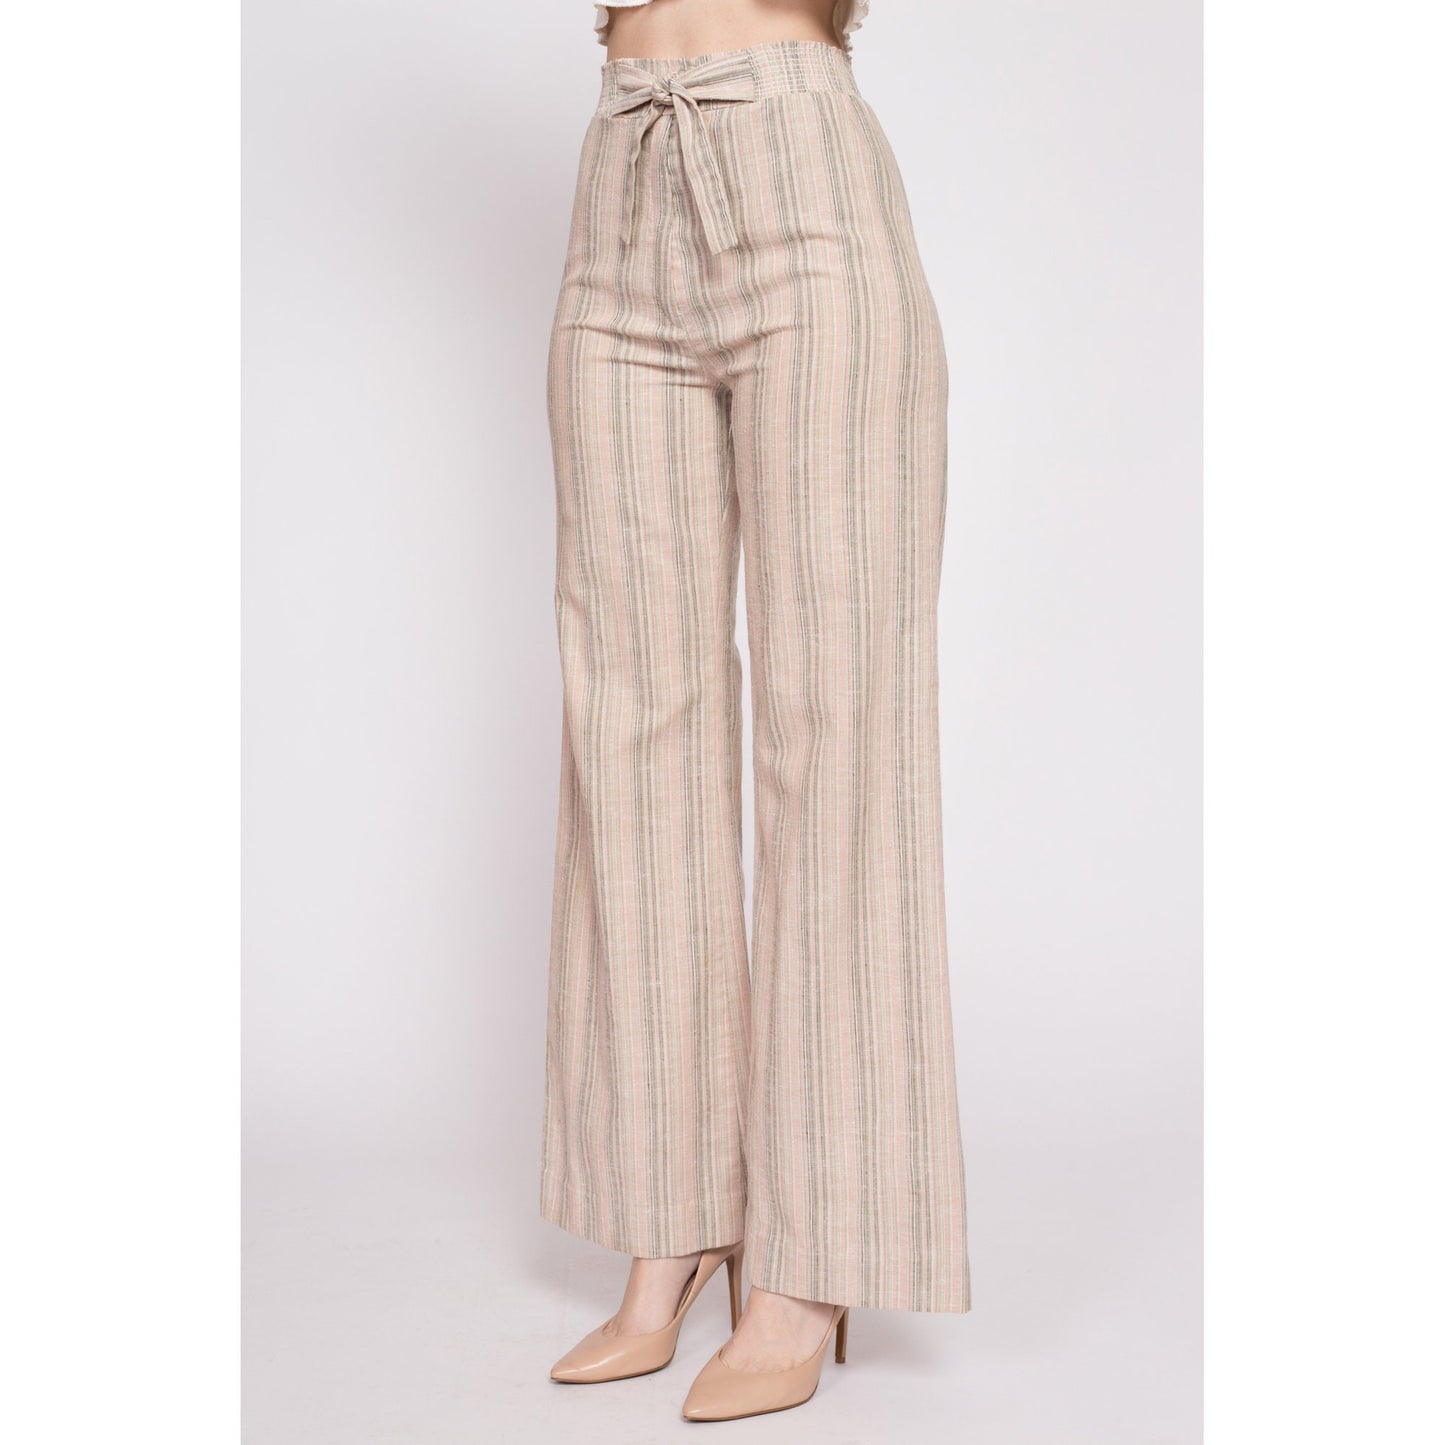 70s Striped High Waisted Flared Pants - XS to Small